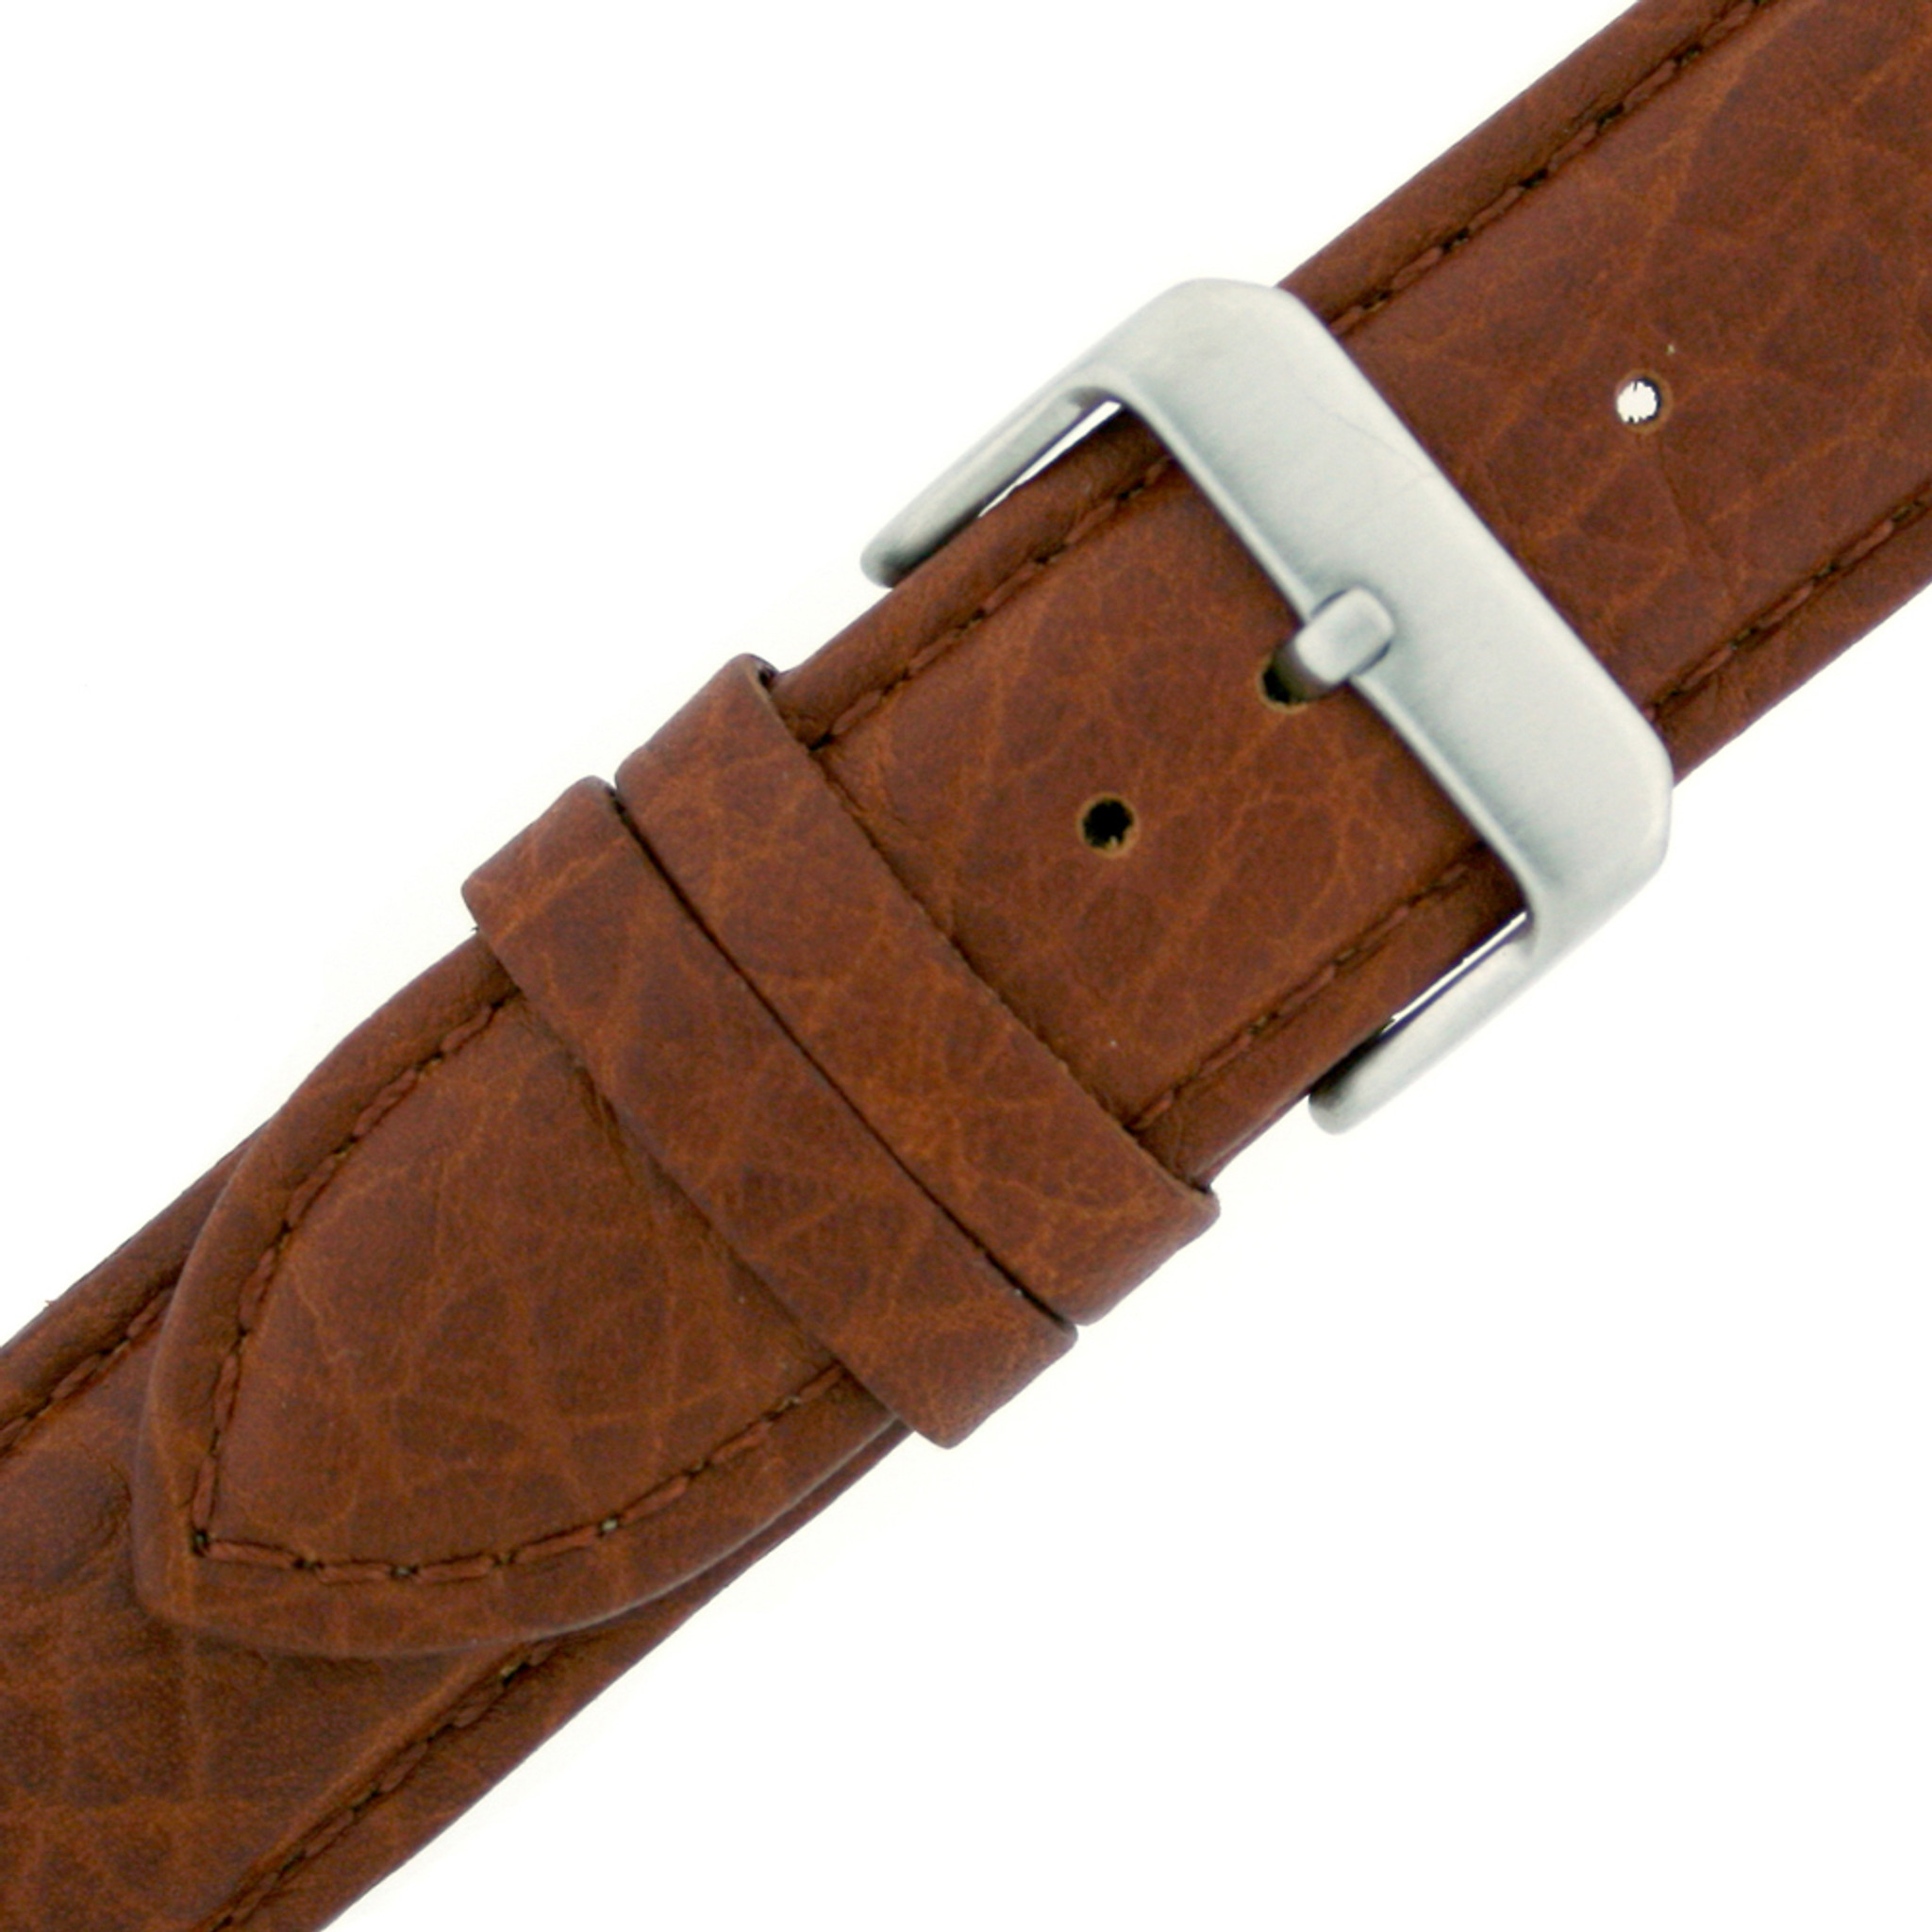 Orange Canvas Water Resistant Watch Band Replacement Straps TechSwiss